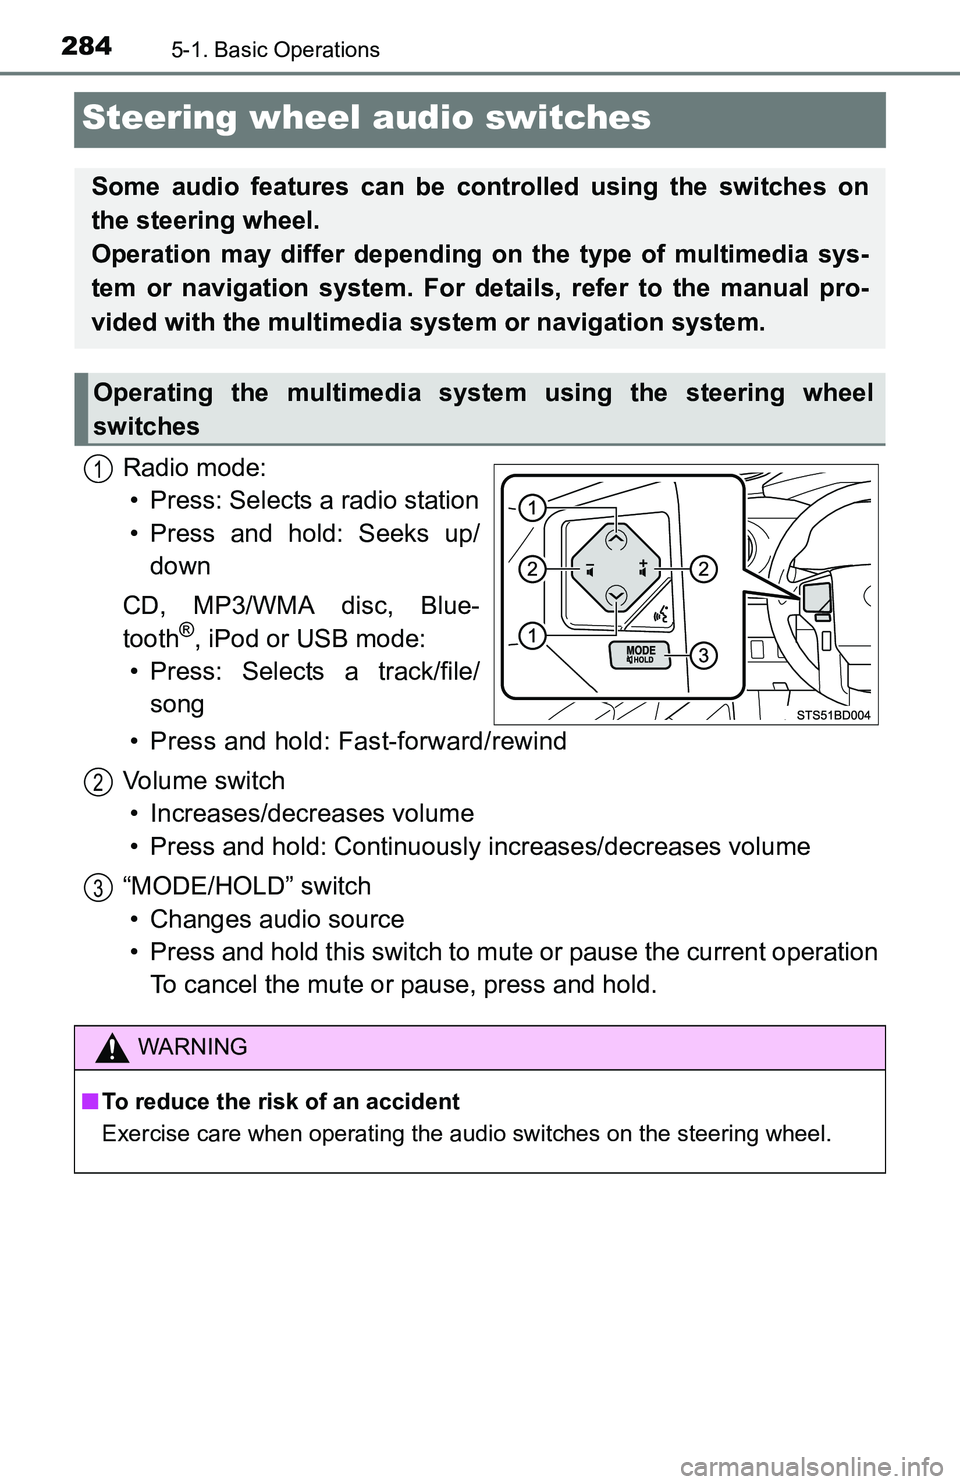 TOYOTA TACOMA 2016  Owners Manual (in English) 2845-1. Basic Operations
Steering wheel audio switches
Radio mode:
• Press: Selects a radio station
• Press and hold: Seeks up/
down
CD, MP3/WMA disc, Blue-
tooth
®, iPod or USB mode:
• Press: 